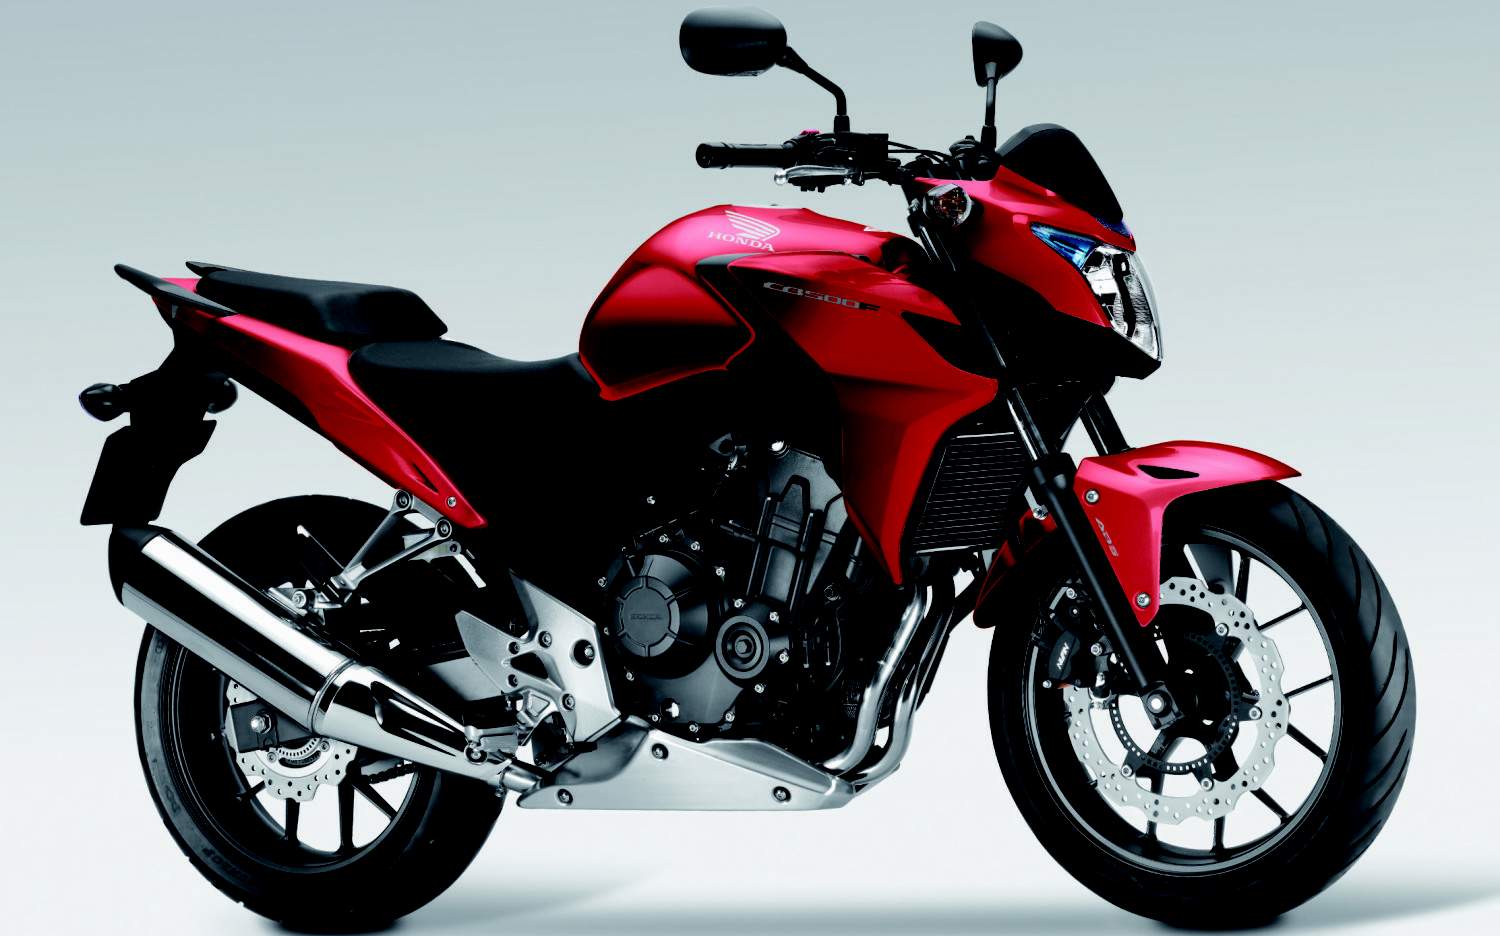 The best motorcycle models for budget purchases in Israel